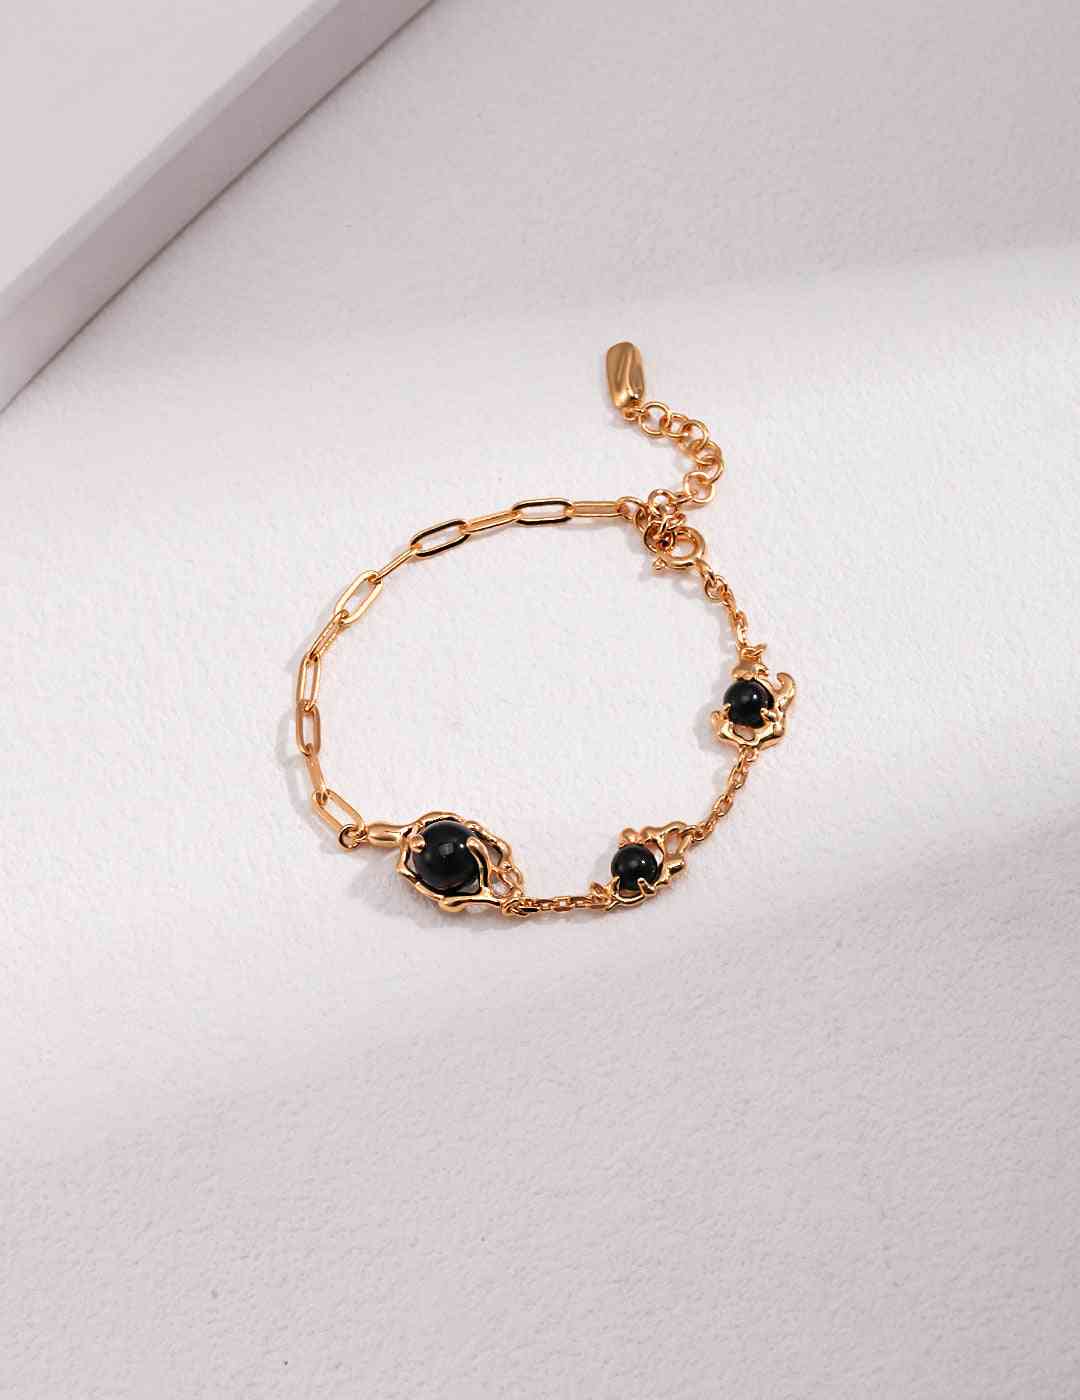 a gold chain bracelet with black agate stones